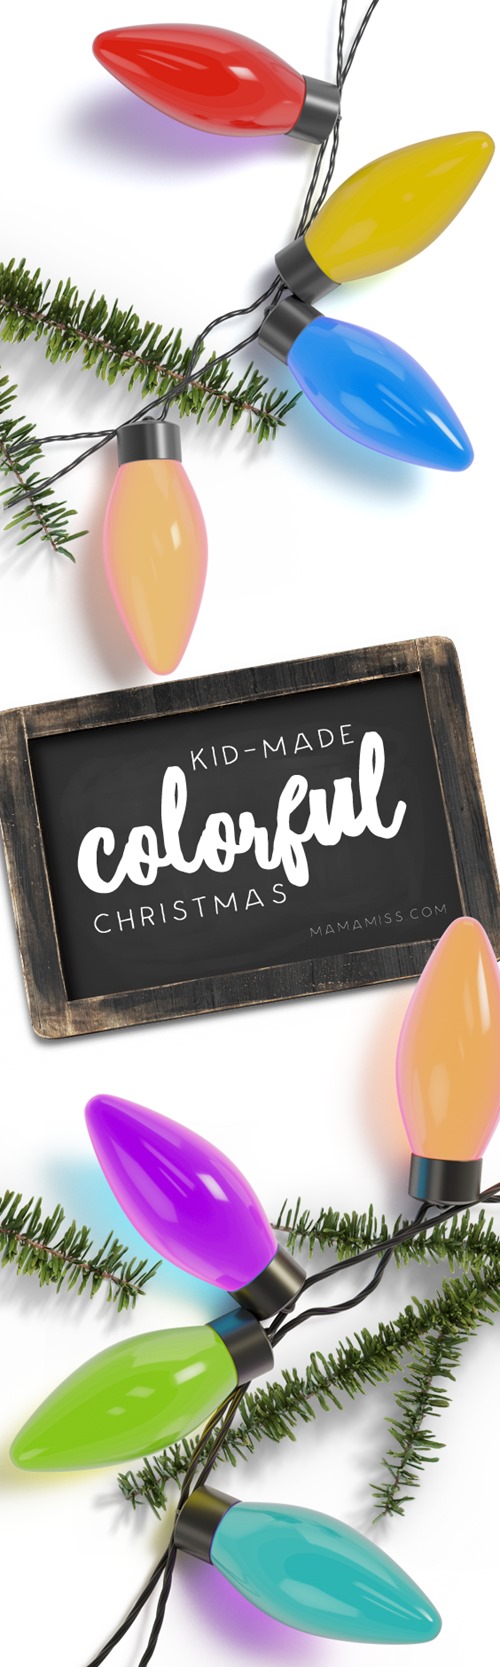 Colorful, vibrant, & vivid #KidMadeChristmas Ornaments and Gifts from @mamamissblog